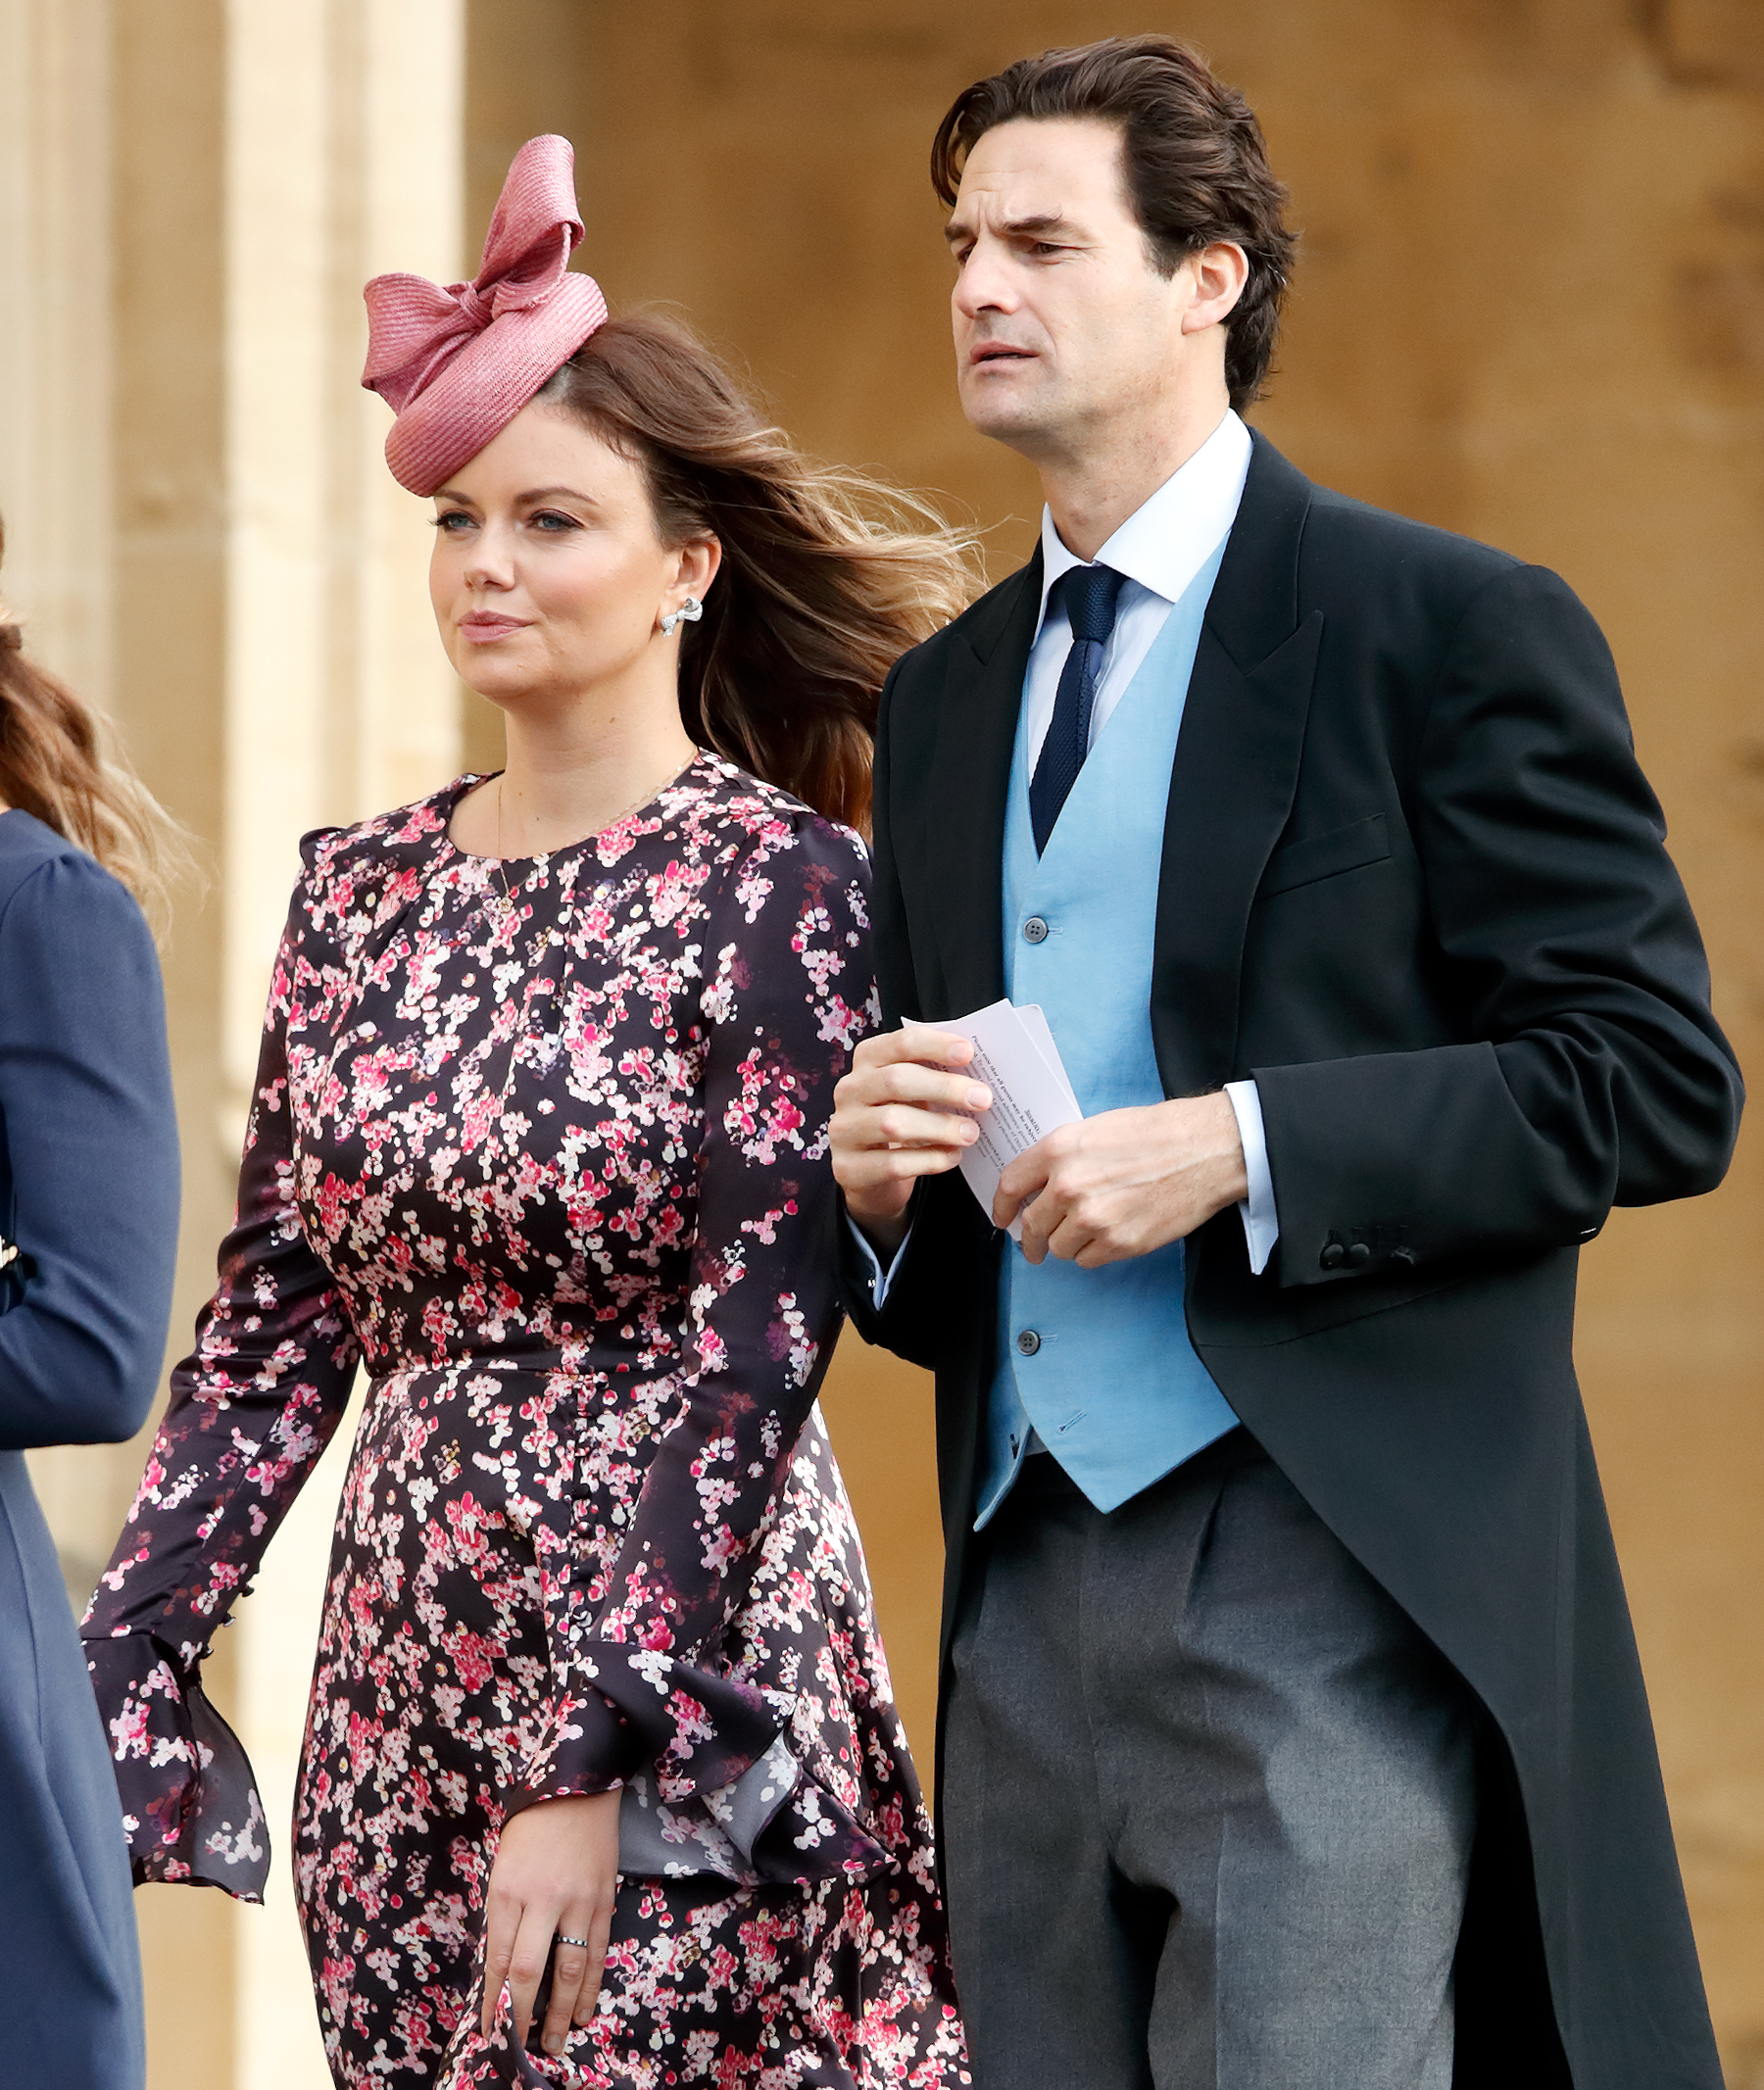 Lady Natasha Rufus Isaacs and Rupert Finch attend the wedding of Princess Eugenie and Jack Brooksbank at St George's Chapel on October 12, 2018 in Windsor, England. | Source: Getty Images